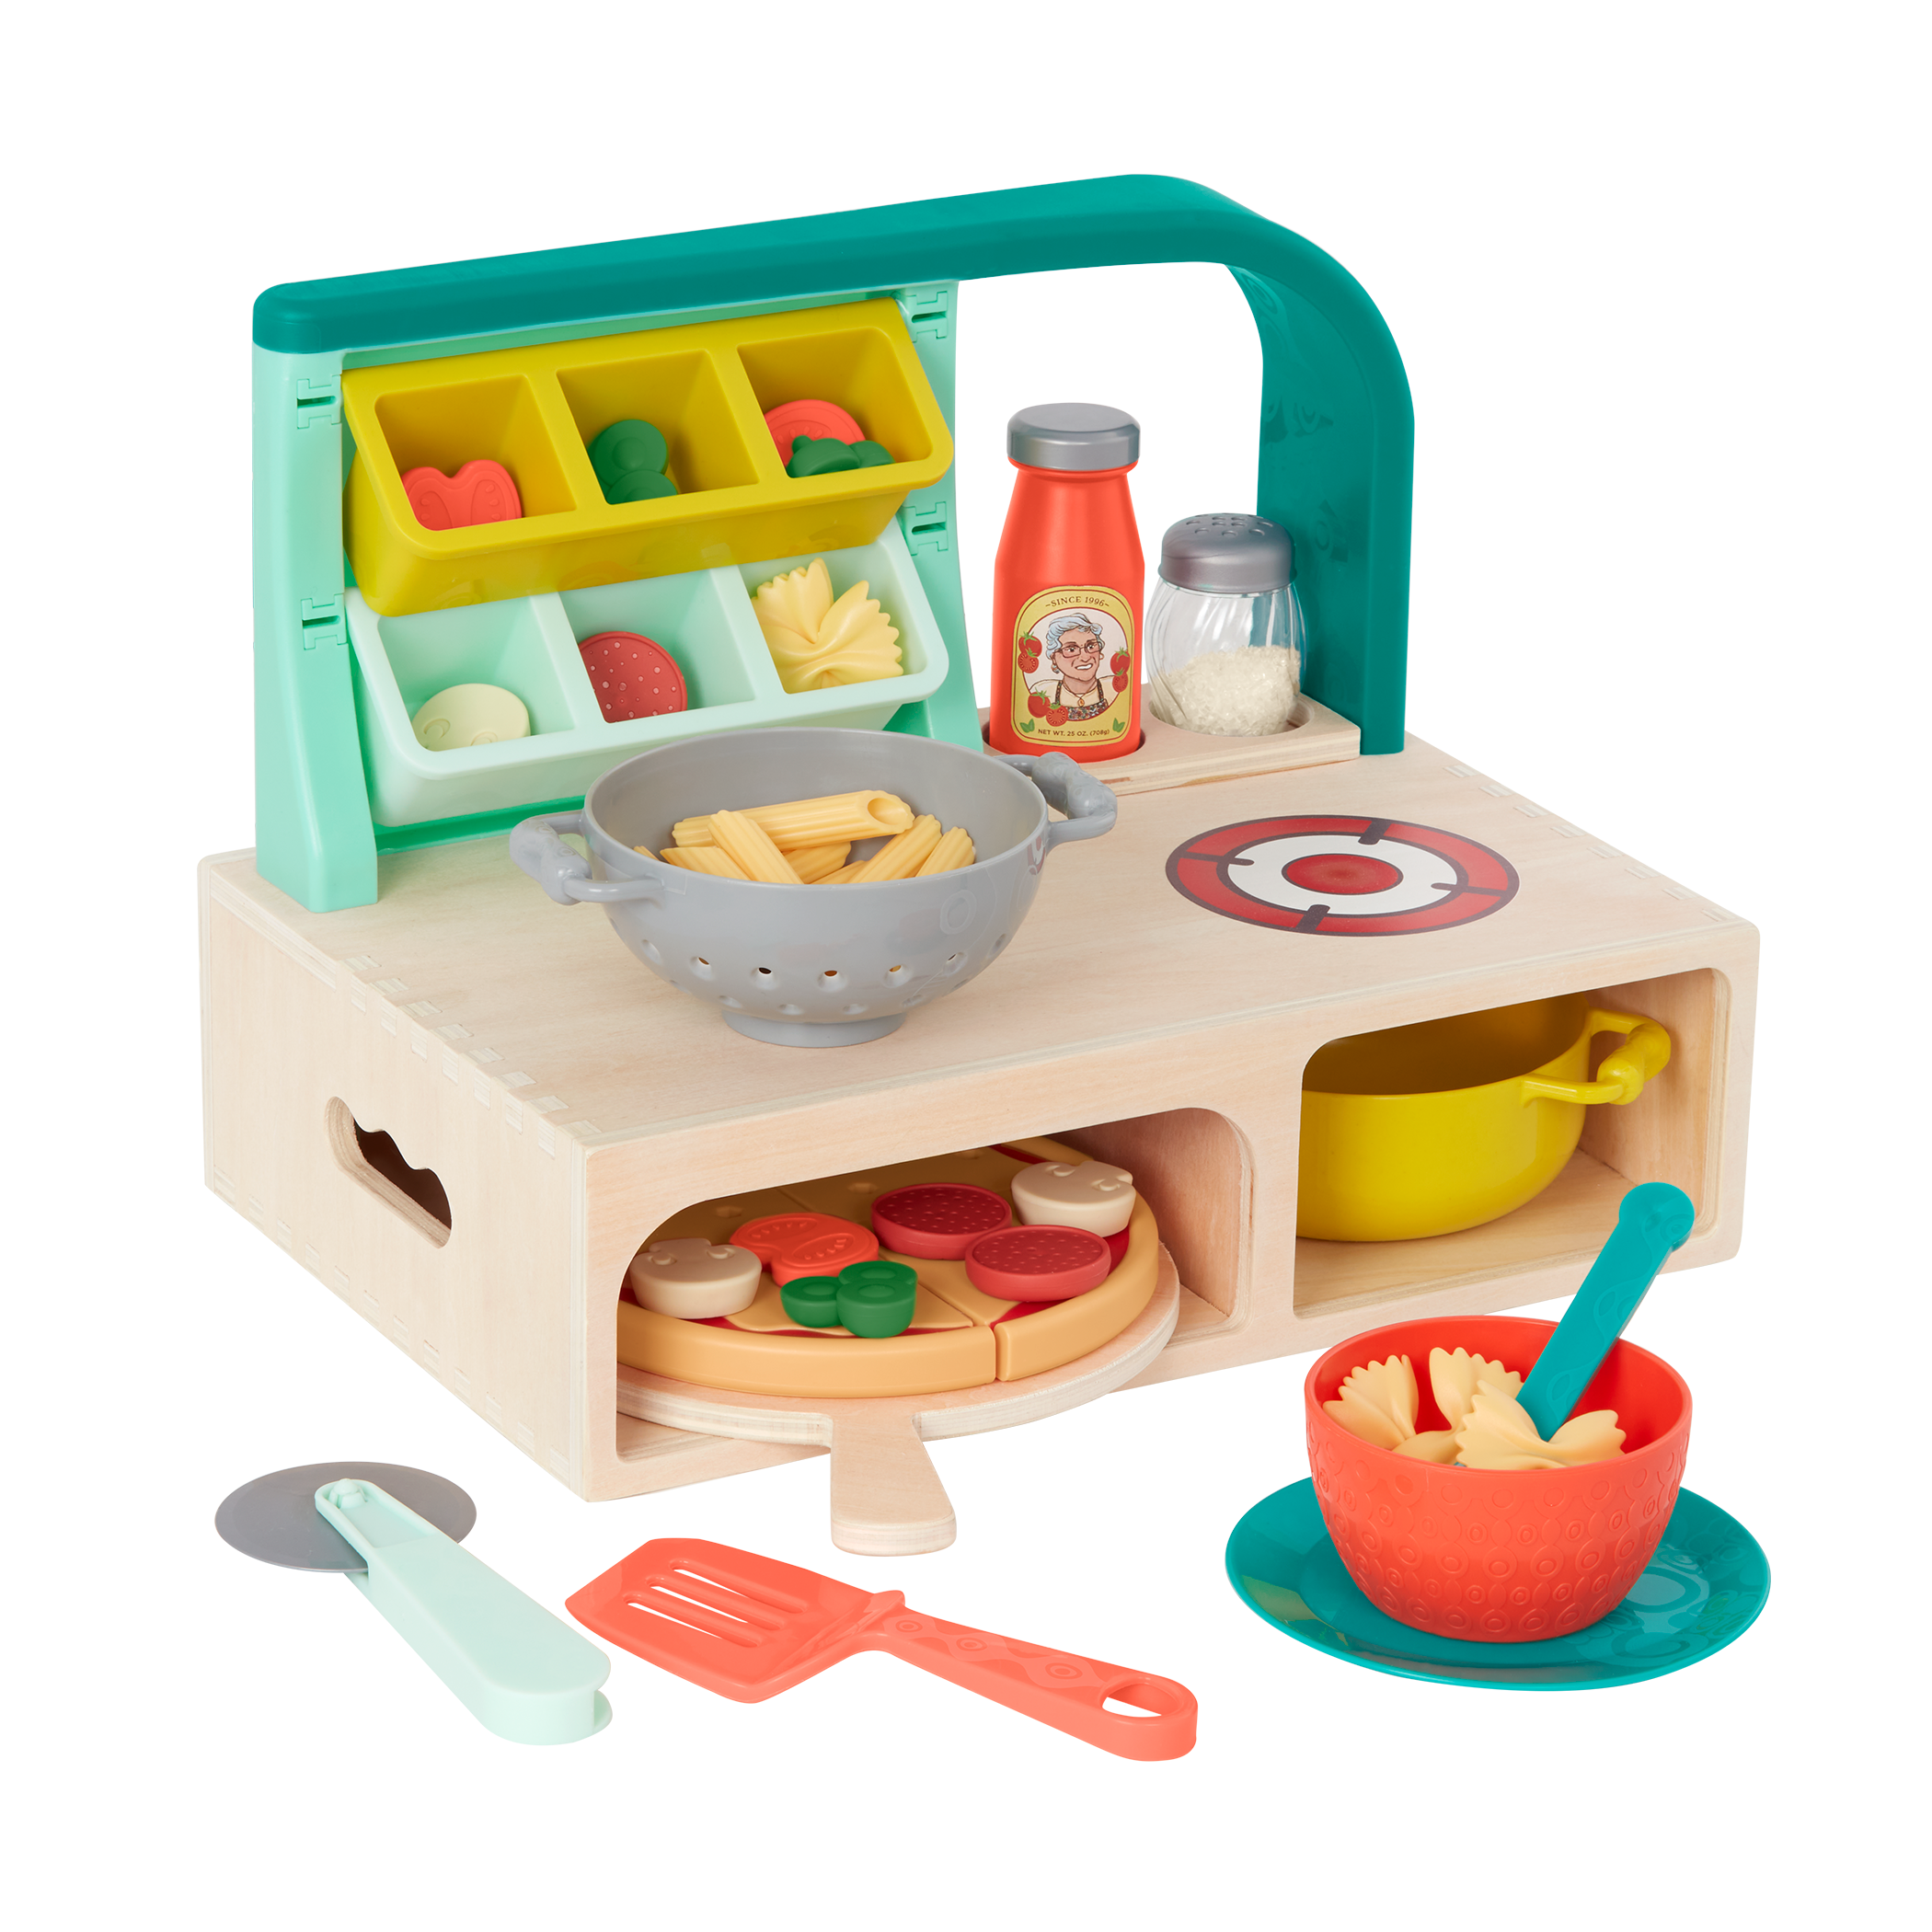 N /C 13 Pieces Mini Breakfast Stove Top Kitchen Appliances Playset,Cooking Pots Pans Food Dishes Pretend Play House Toys for Toddlers and Kids